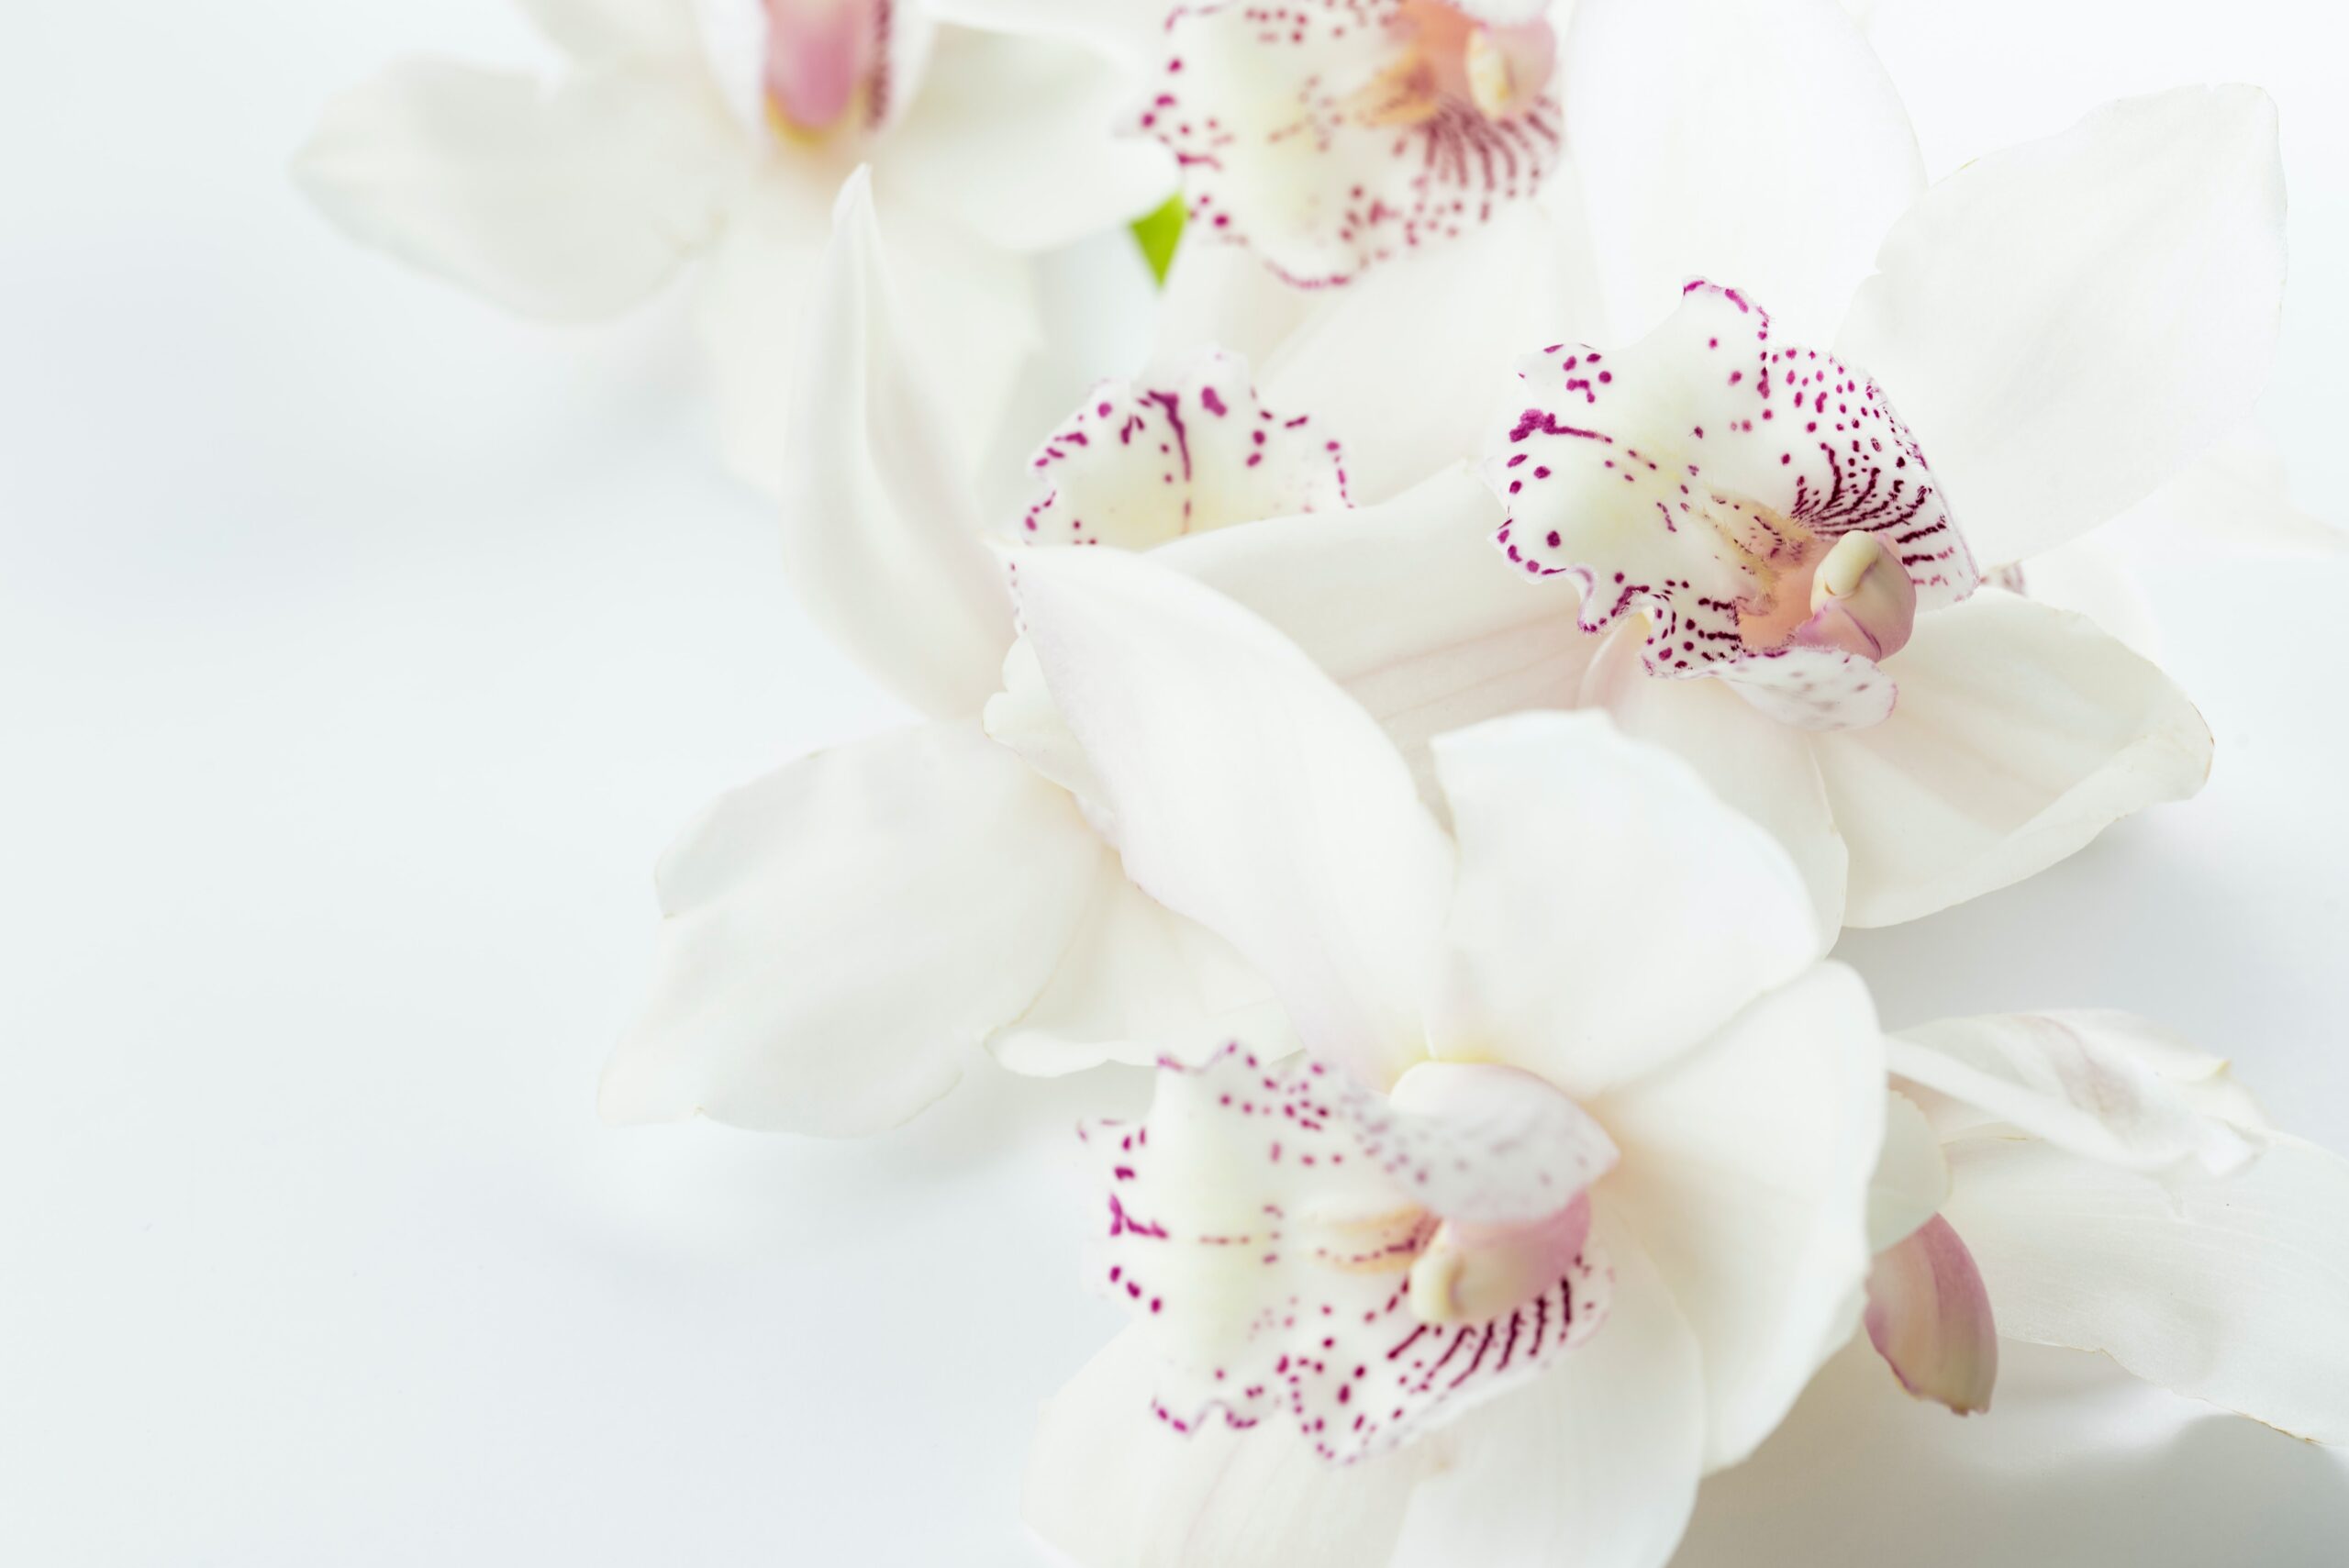 How to Cultivate Orchids